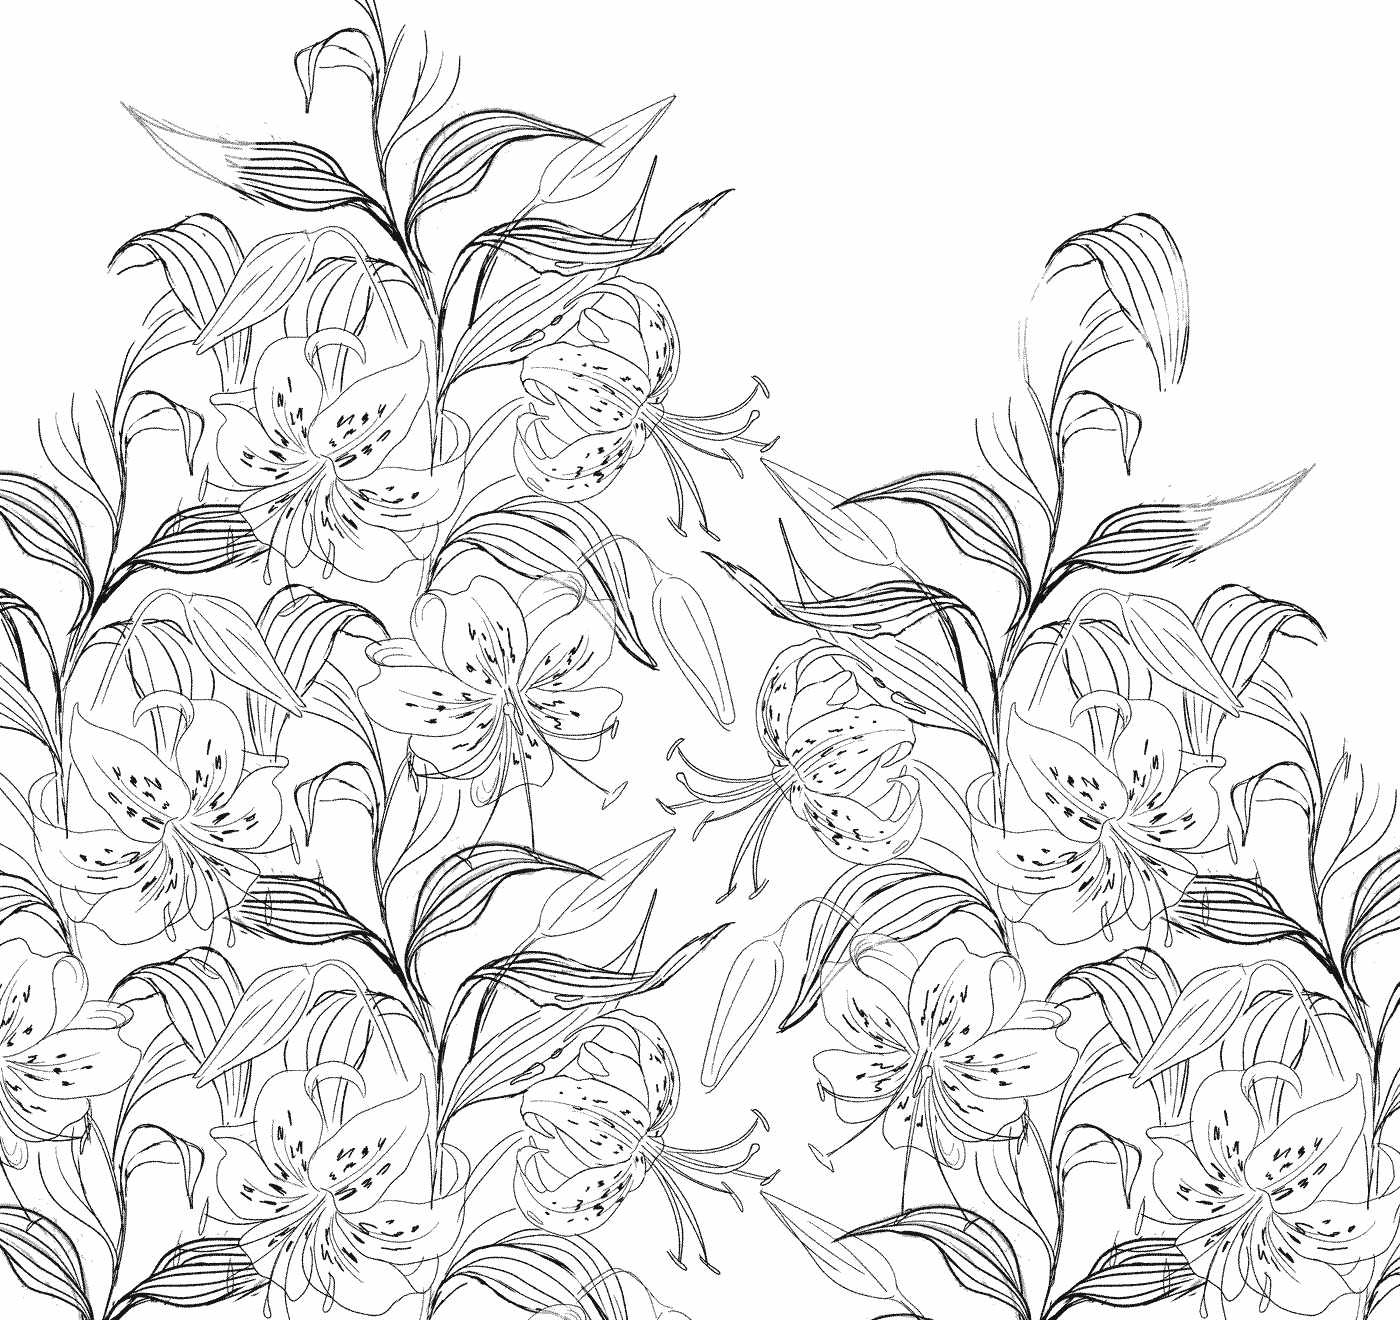 Tiger Lily floral pattern art sketch by Andrea Muller